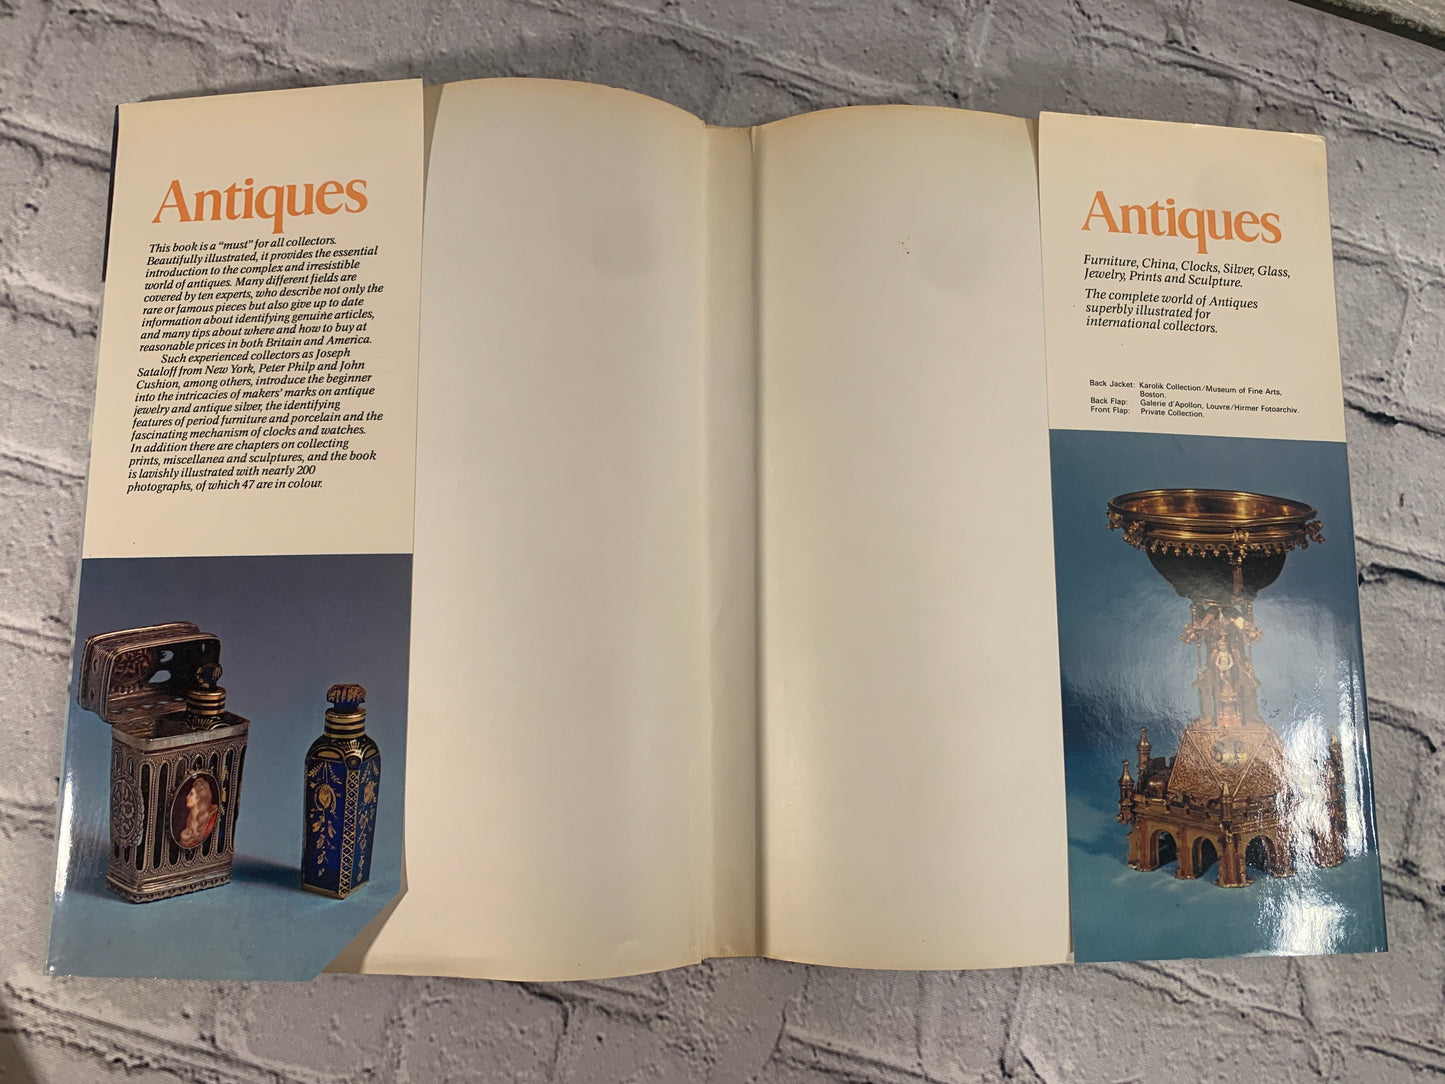 Antiques: A Popular Guide for Everyone [1973]